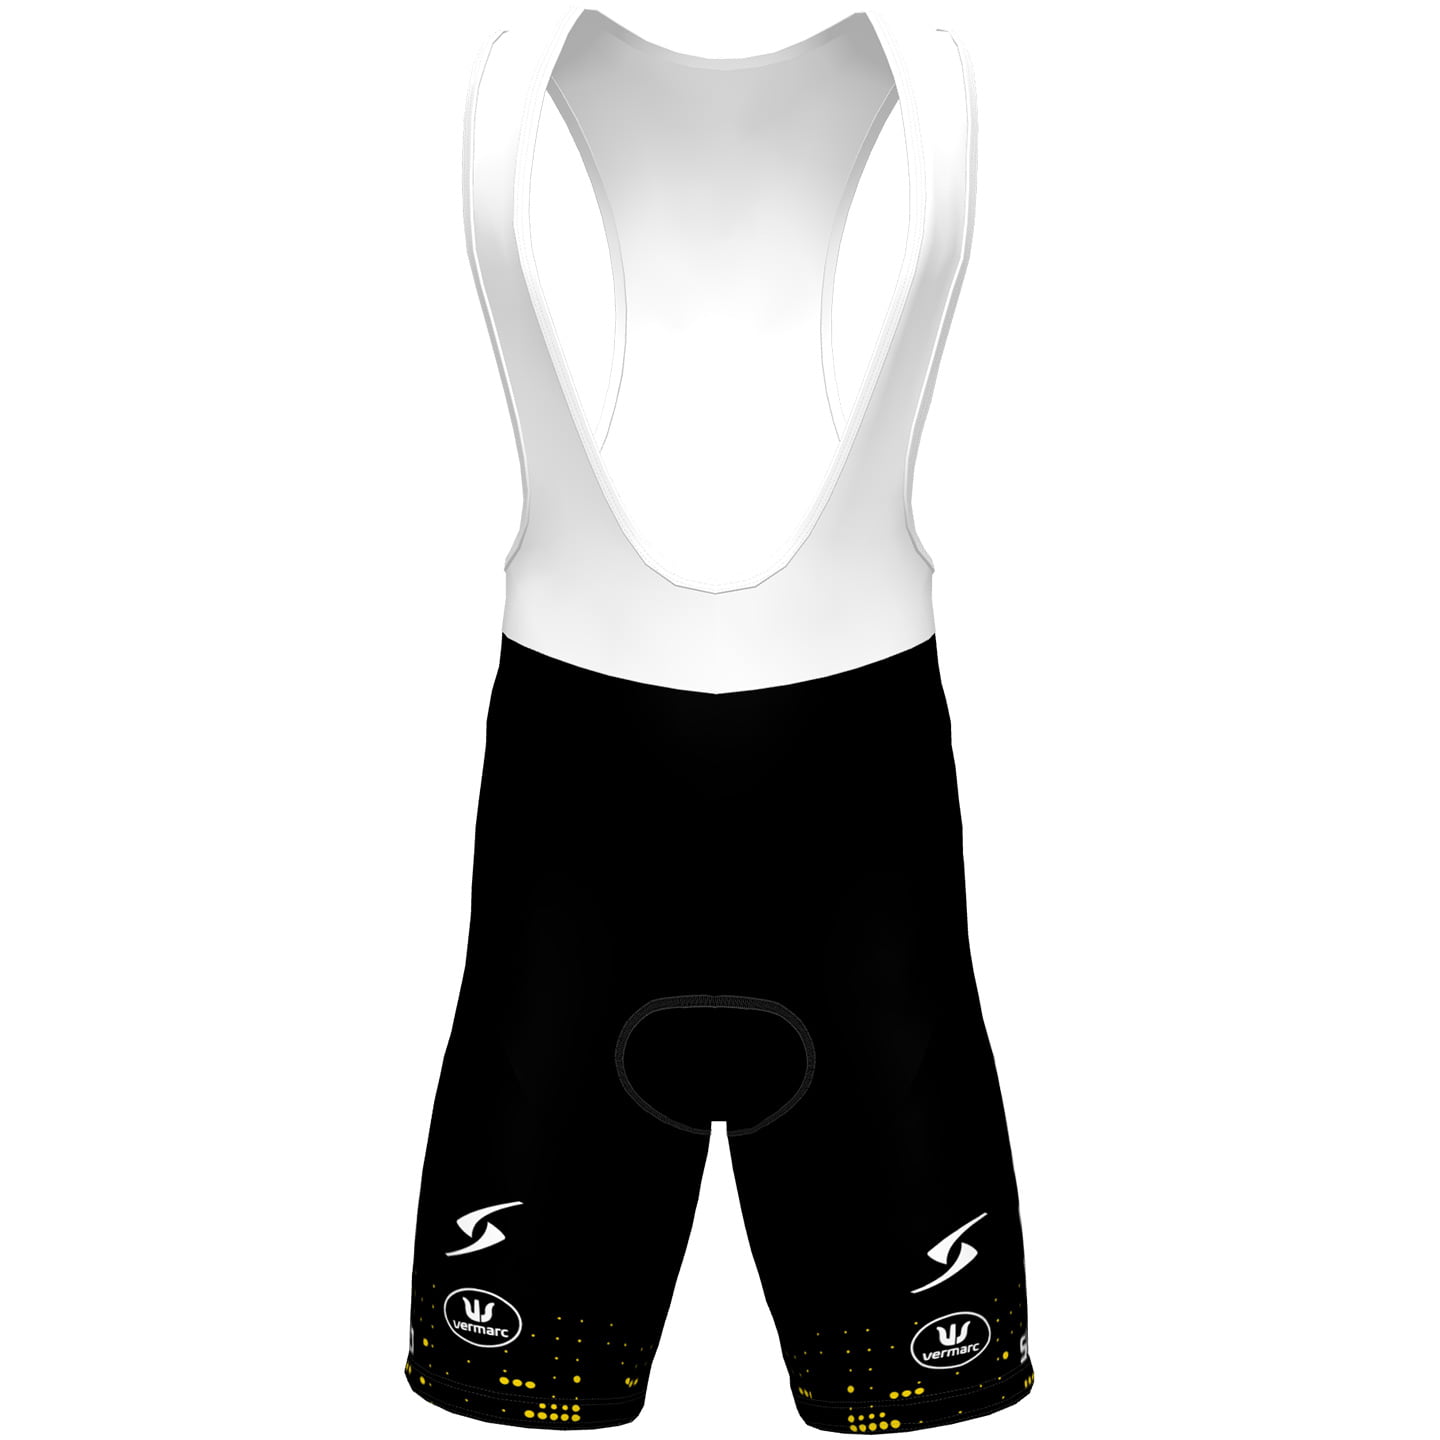 TEAM LOTTO-KERN HAUS 2023 Bib Shorts, for men, size 2XL, Cycle trousers, Cycle gear